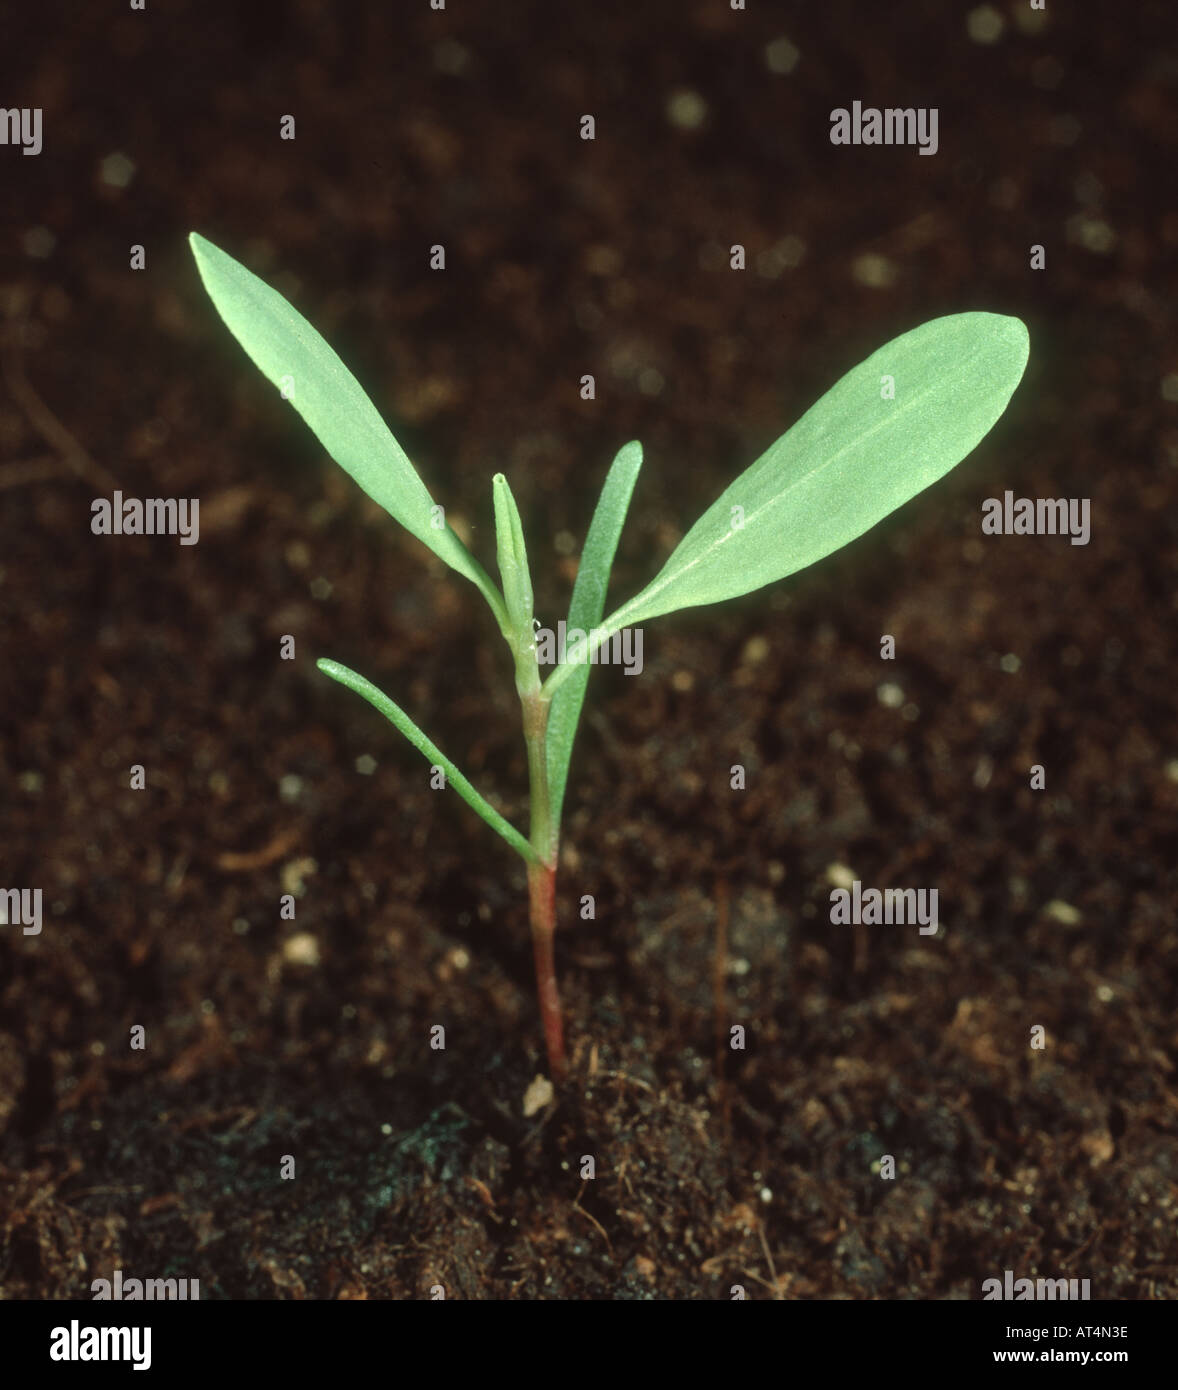 Knotgrass Polygonum Aviculare Seedling With 2 3 True Leaves Stock Photo Alamy